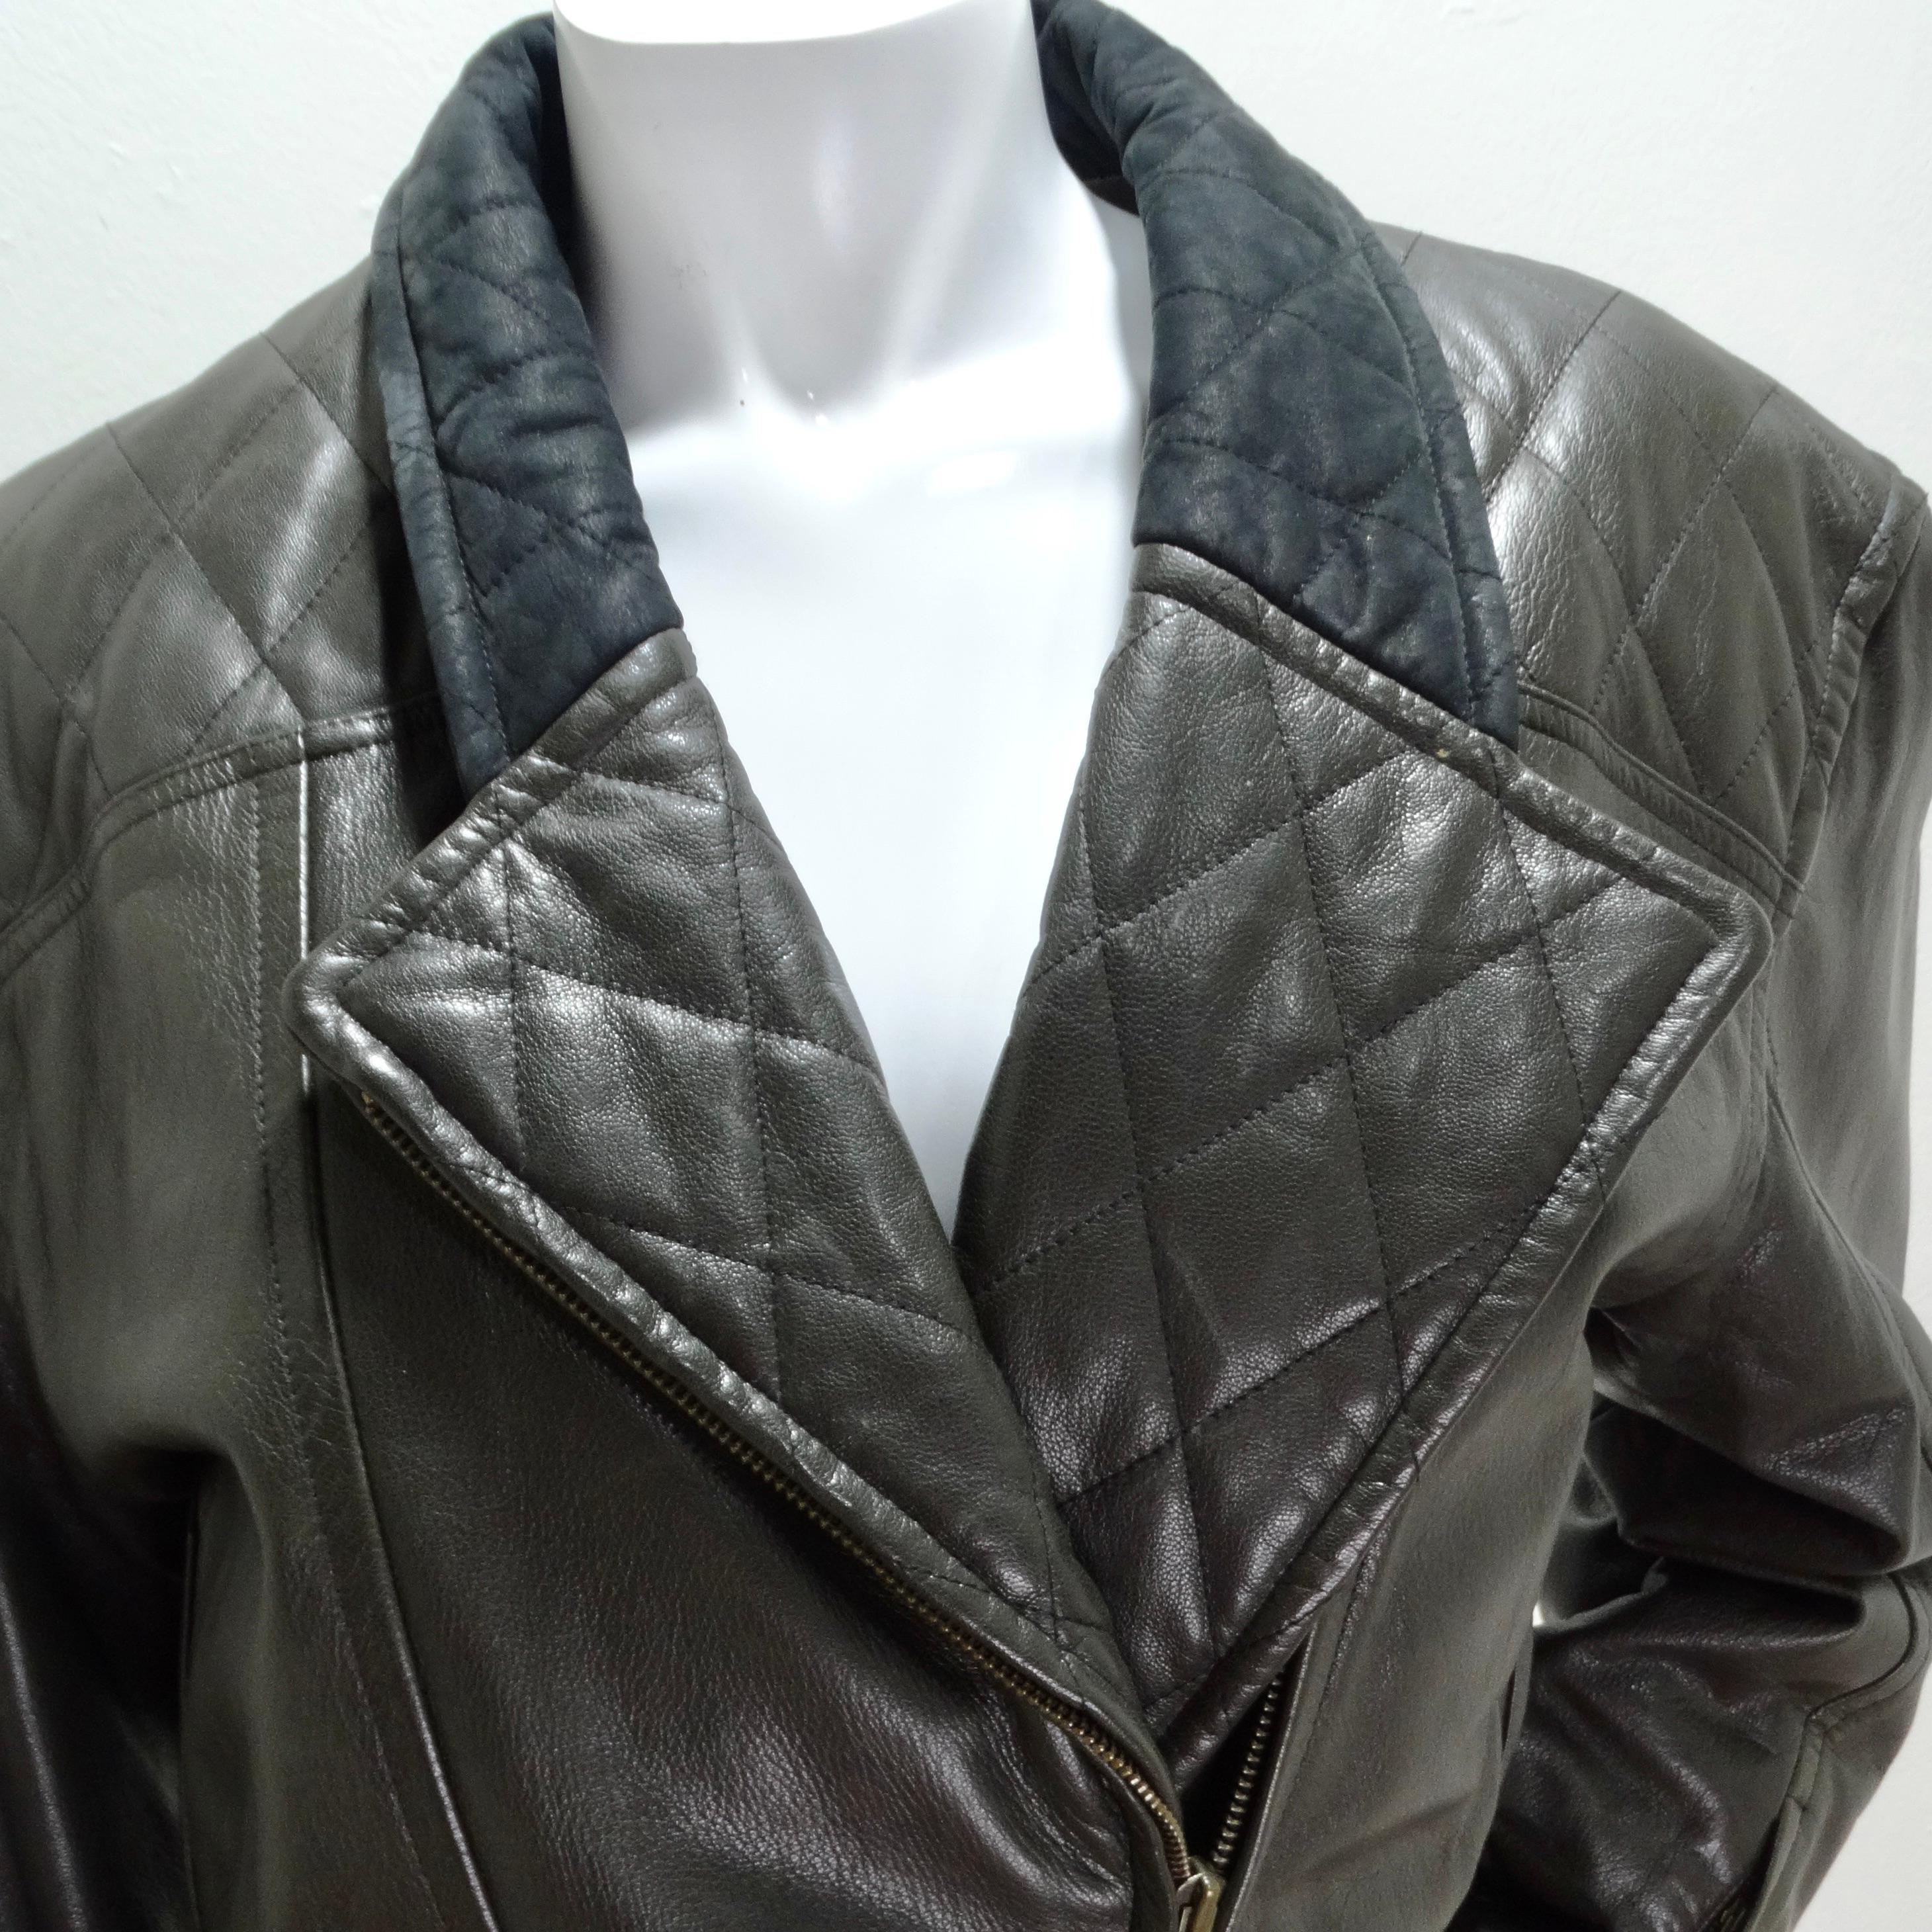 Introducing the Robert Comstock 1980s Grey Belted Leather Moto Jacket—an extraordinary and timeless piece that effortlessly marries structure with luxury. This moto-style leather jacket isn't just an article of clothing; it's a wearable work of art